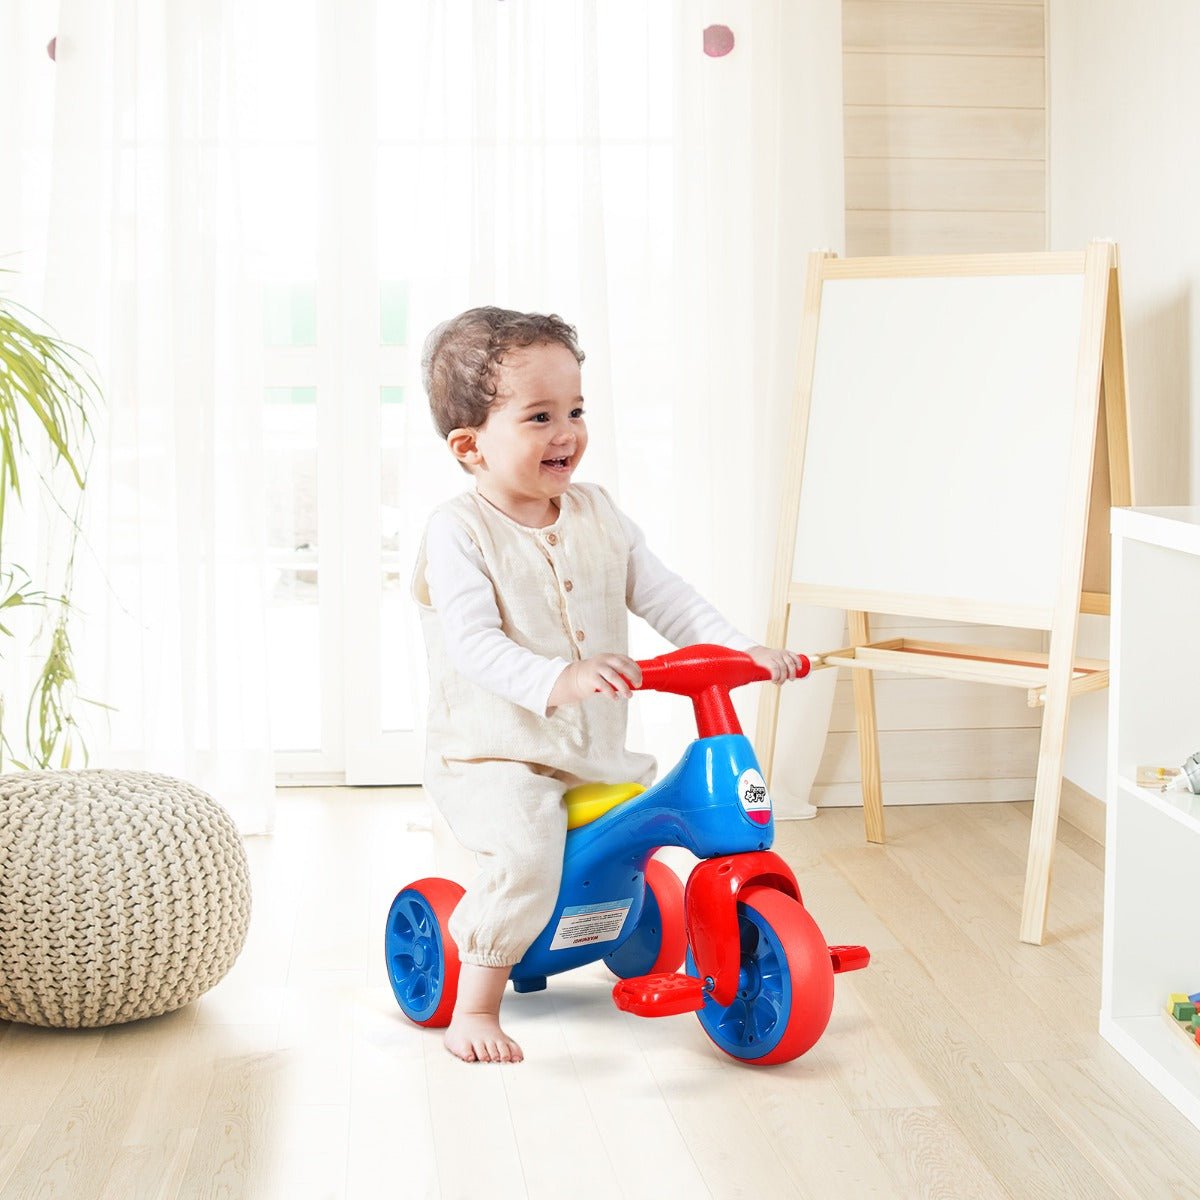 Toddler's Adventure: Blue Tricycle with Foot Pedals for Joyful Playtime